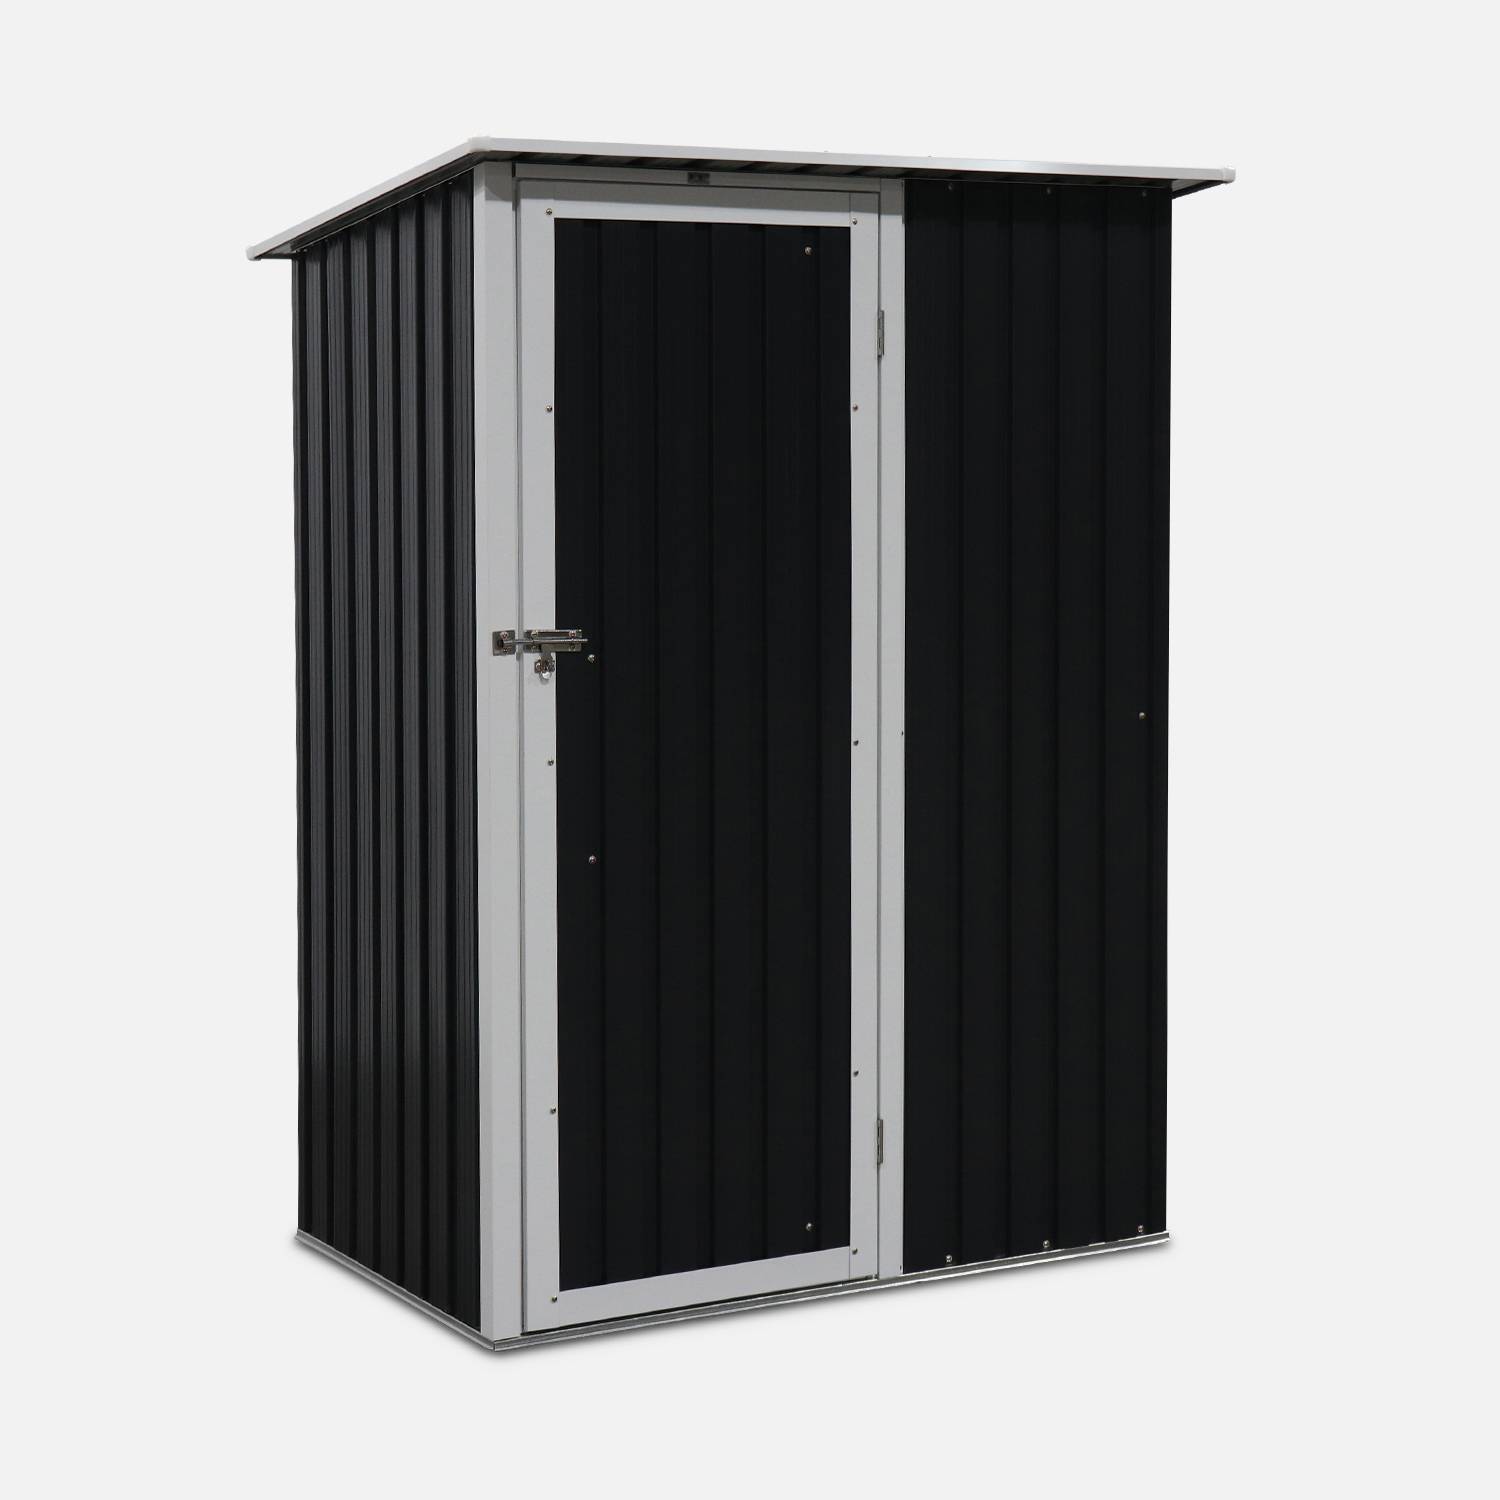 (4.6 X 3.1FT) 1.36m² Metal garden shed - Tool shed with single latch door, ground fixing kit supplied - Lys - Grey and White,sweeek,Photo1